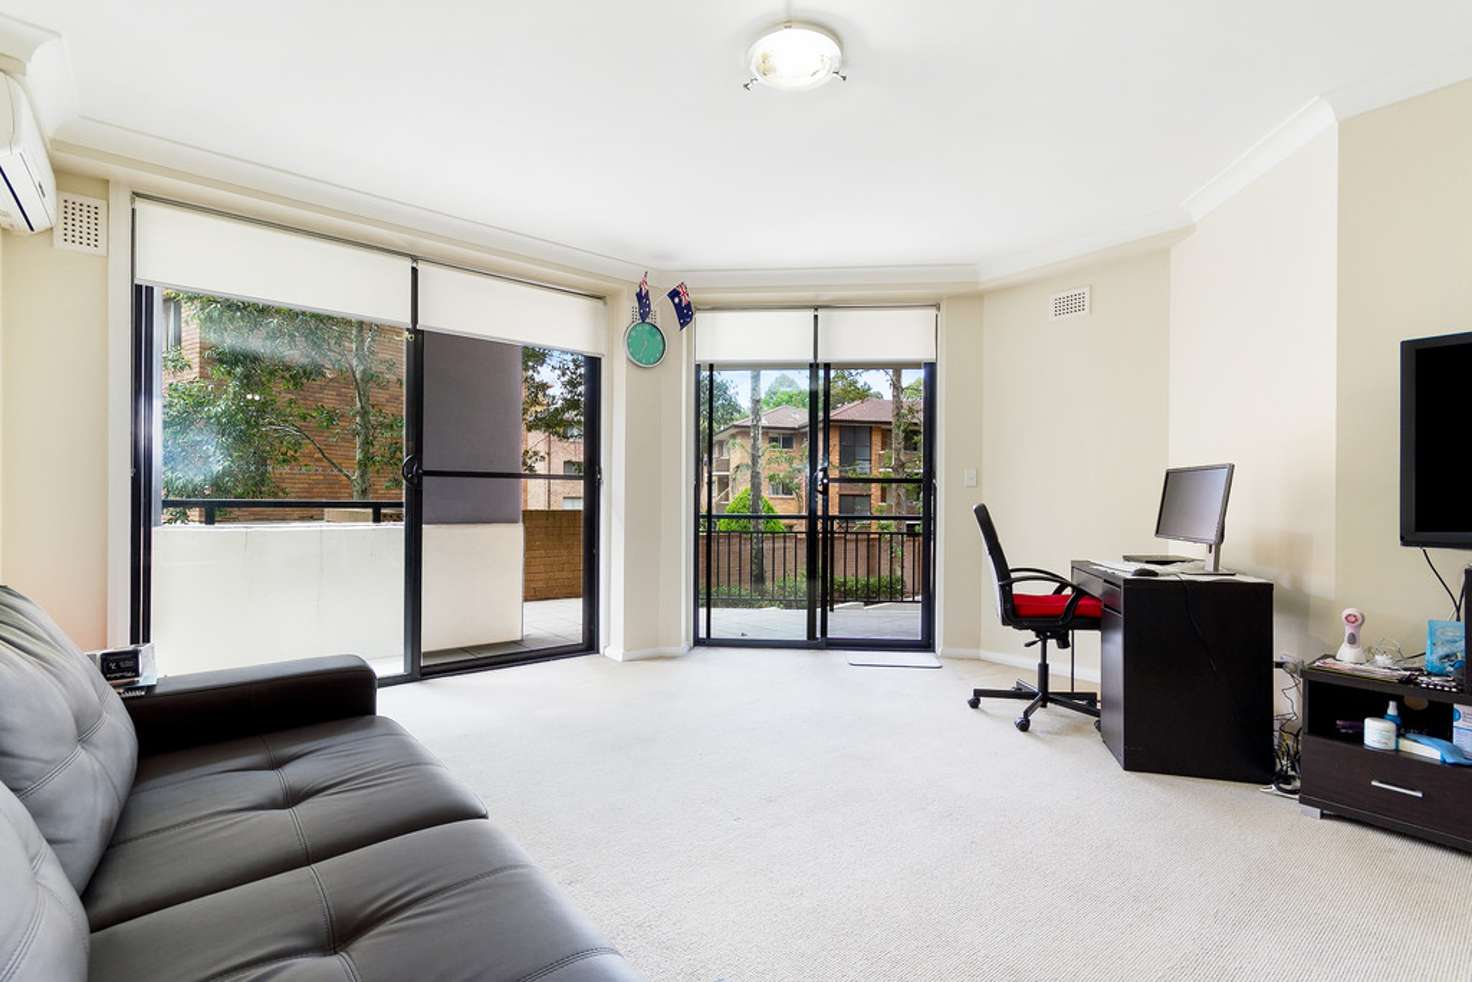 Main view of Homely house listing, 101/19-21 Good Street, Parramatta NSW 2150